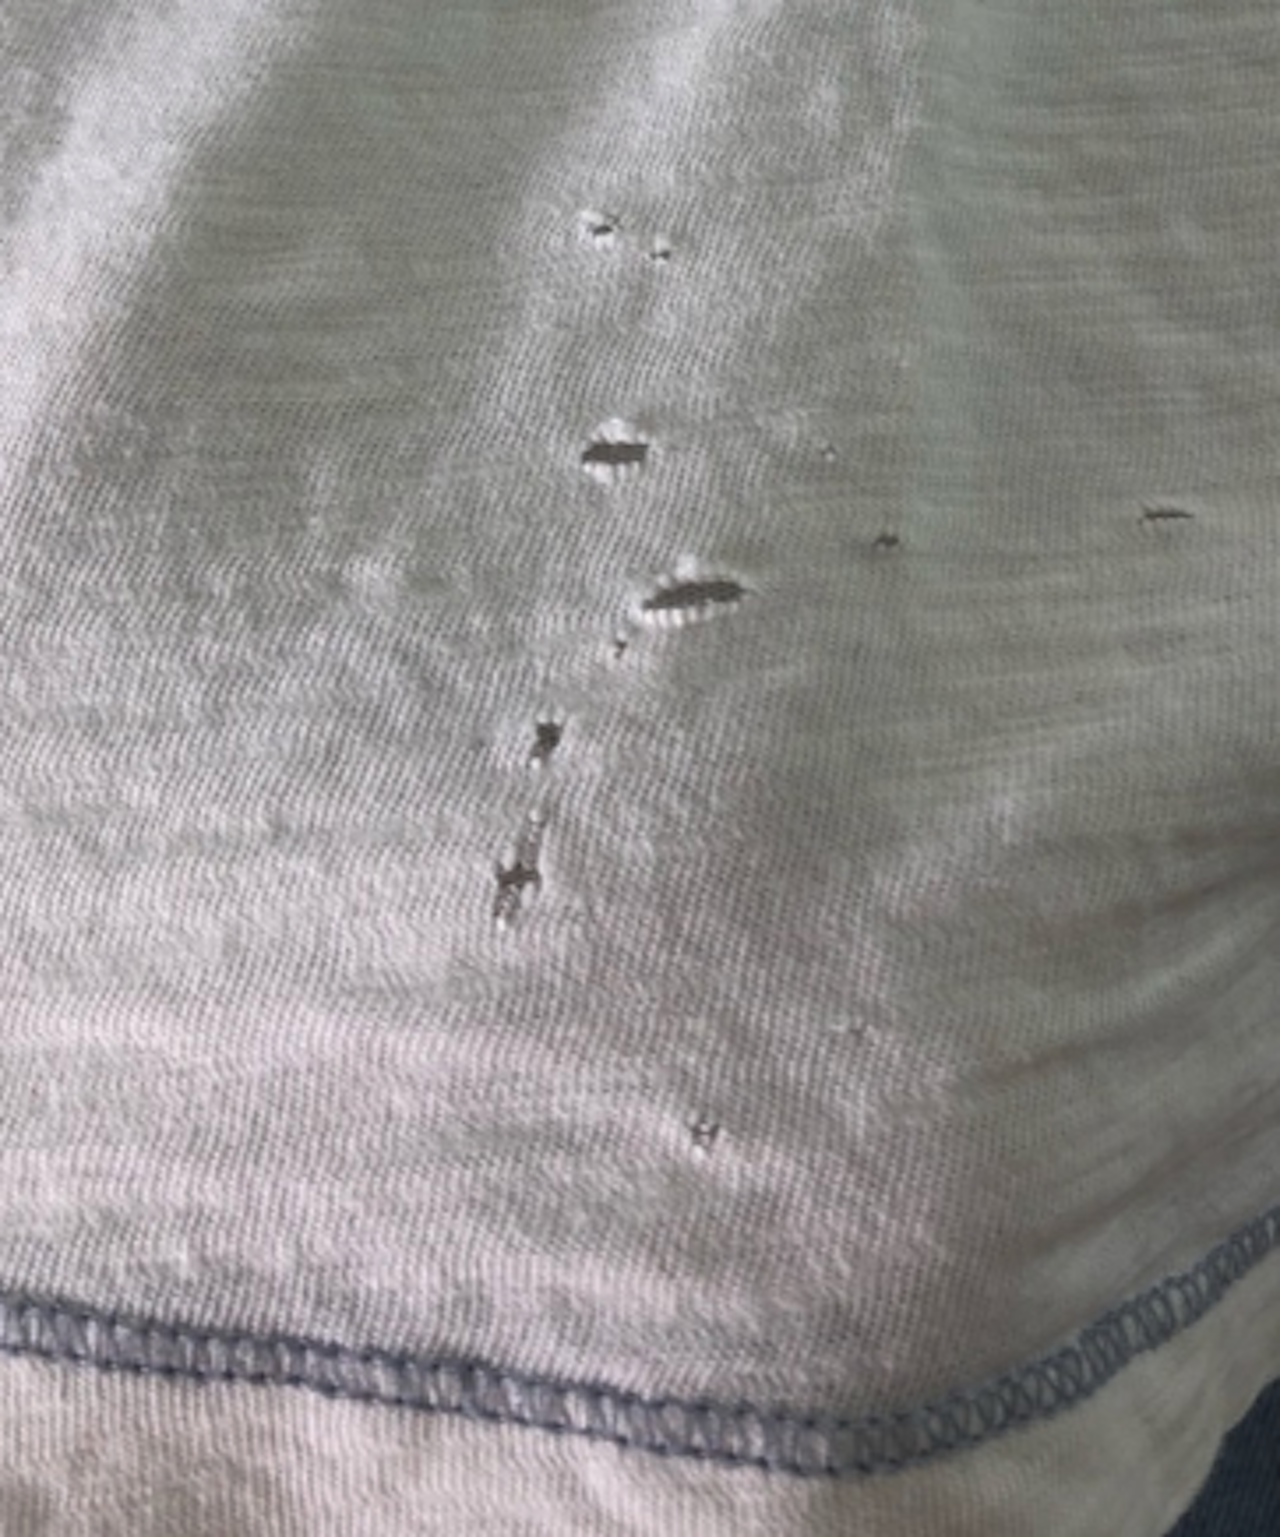 What Causes Holes in Clothes?